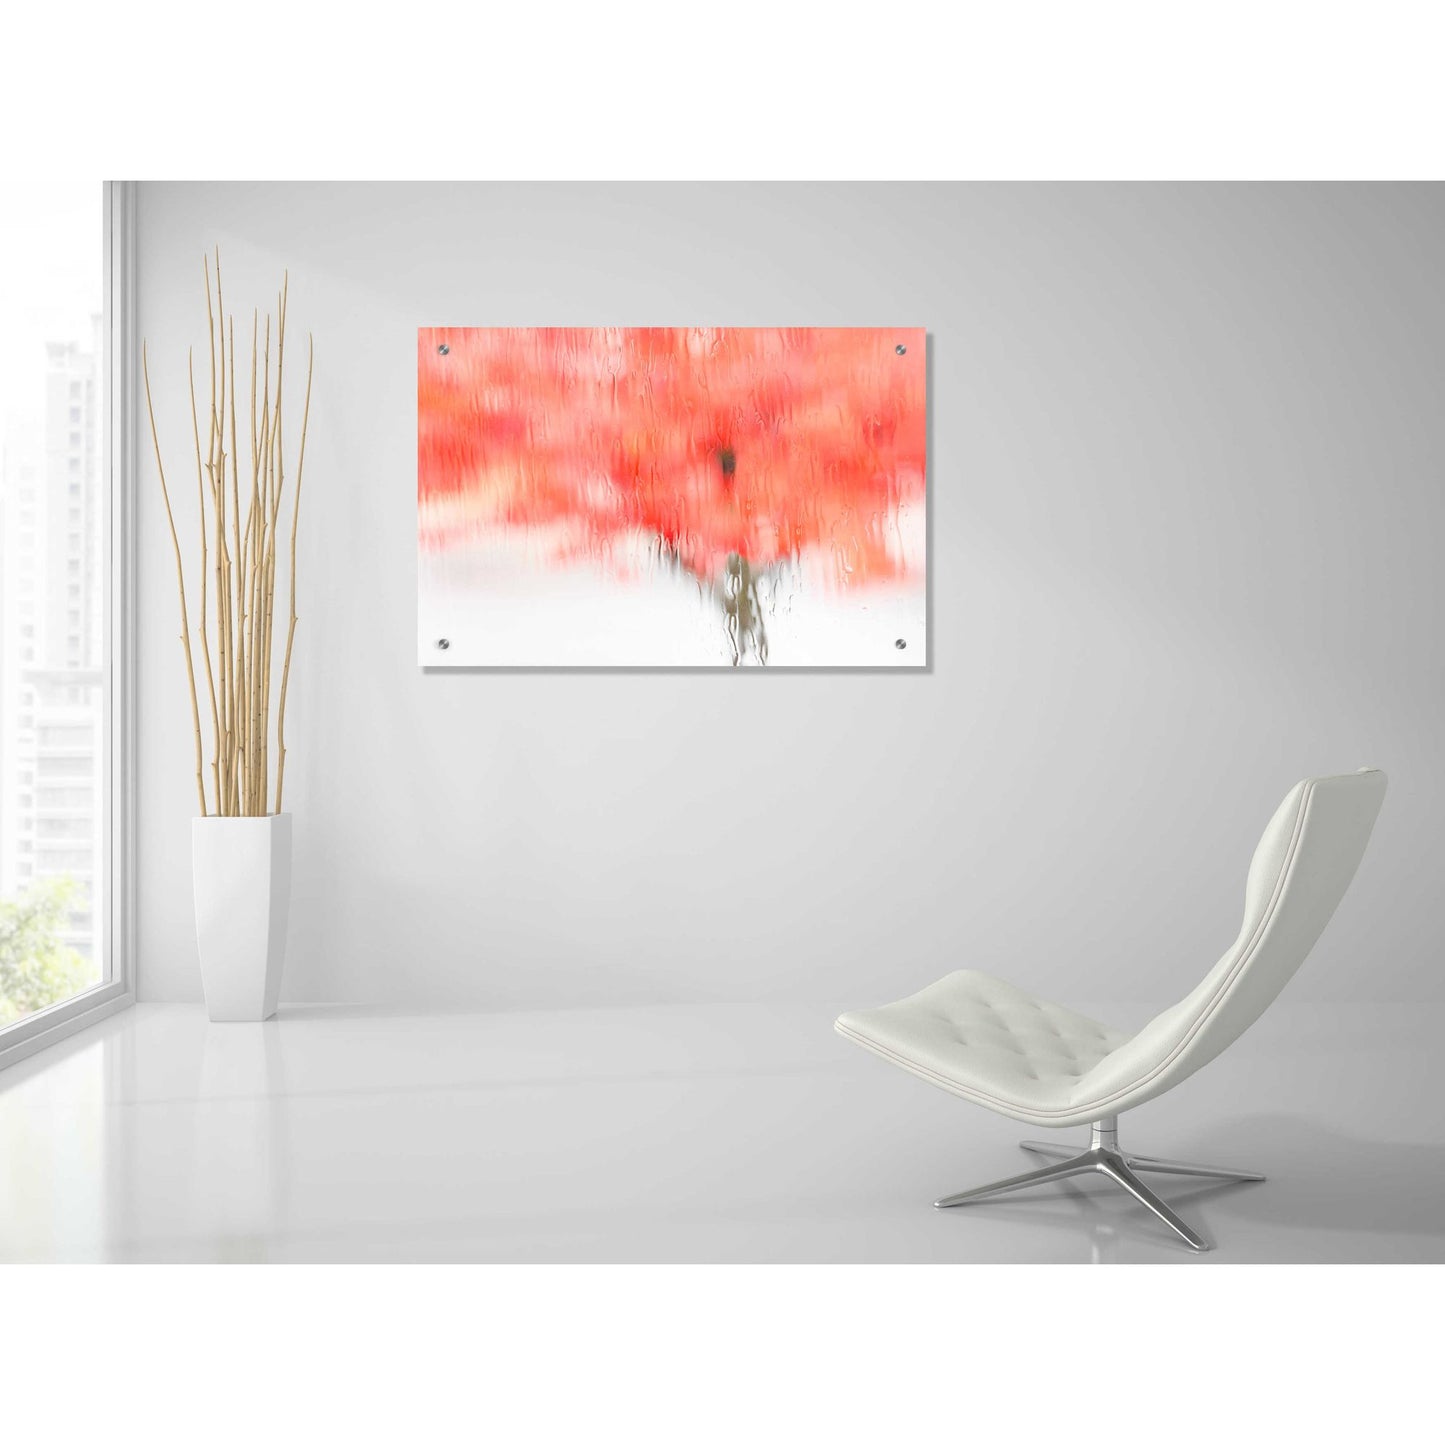 Epic Art 'Coral Window' by Dennis Frates, Acrylic Glass Wall Art,36x24